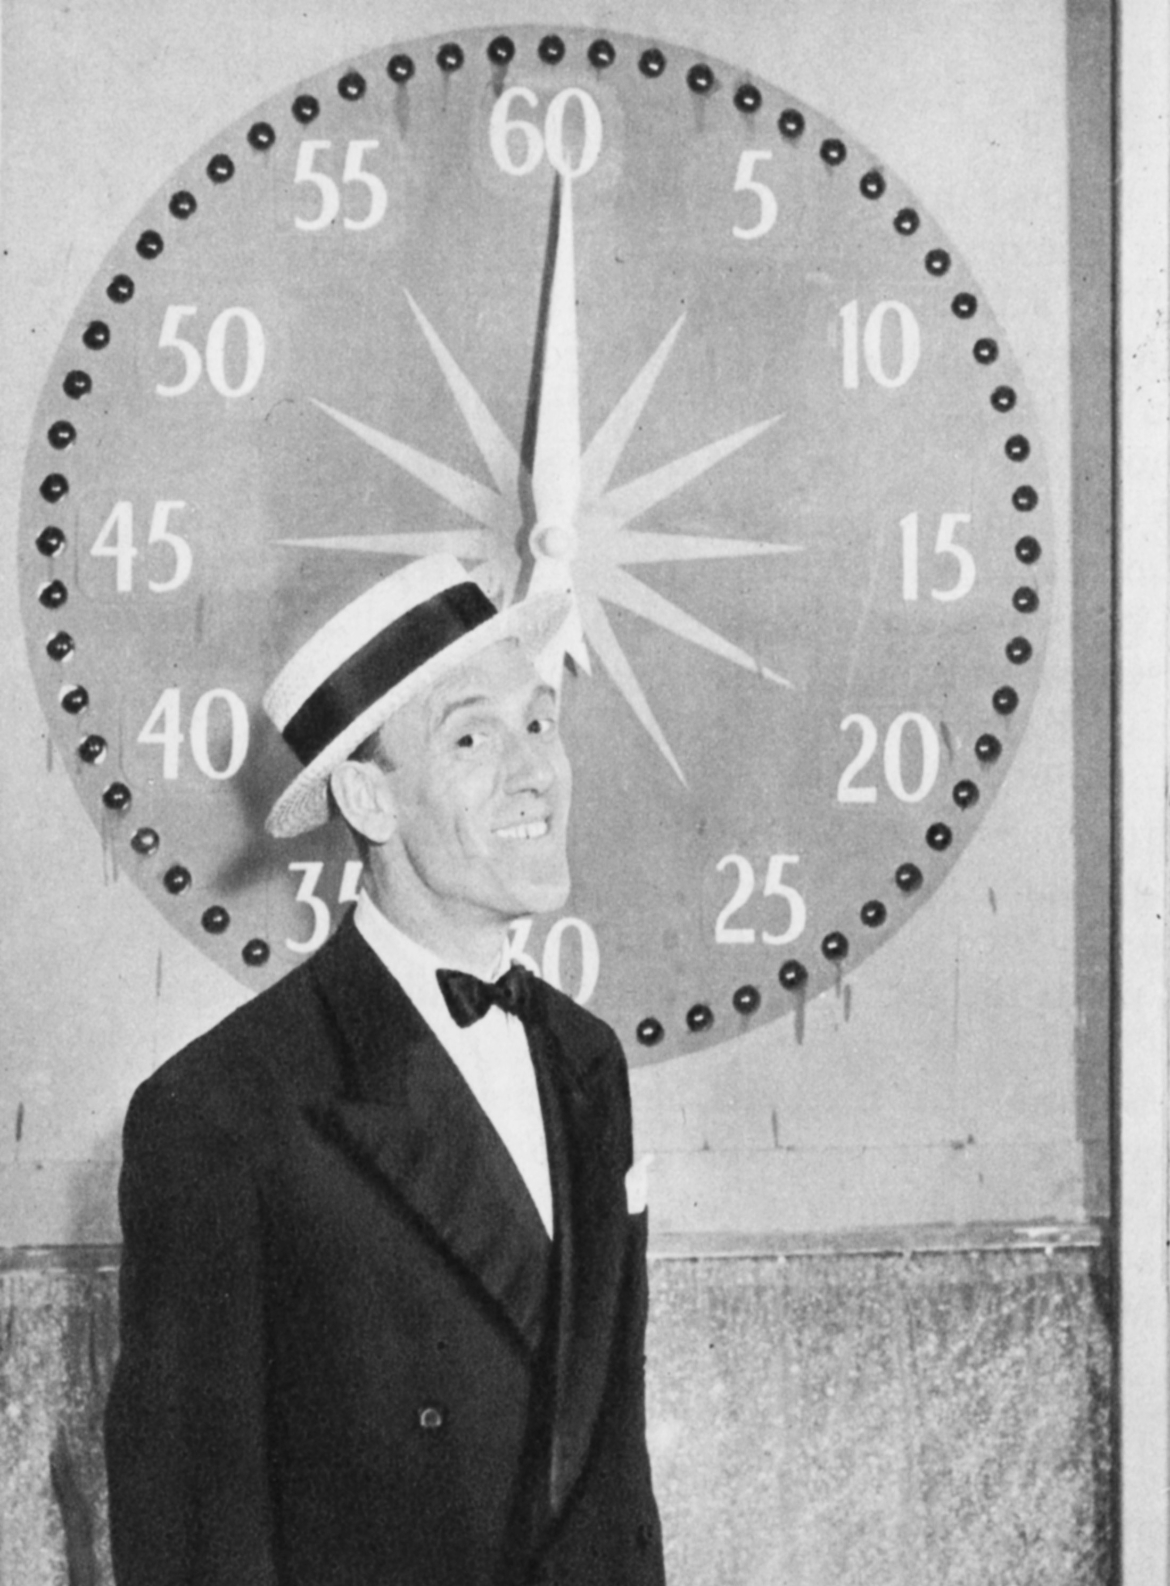 A man stands in front of a decorative clock